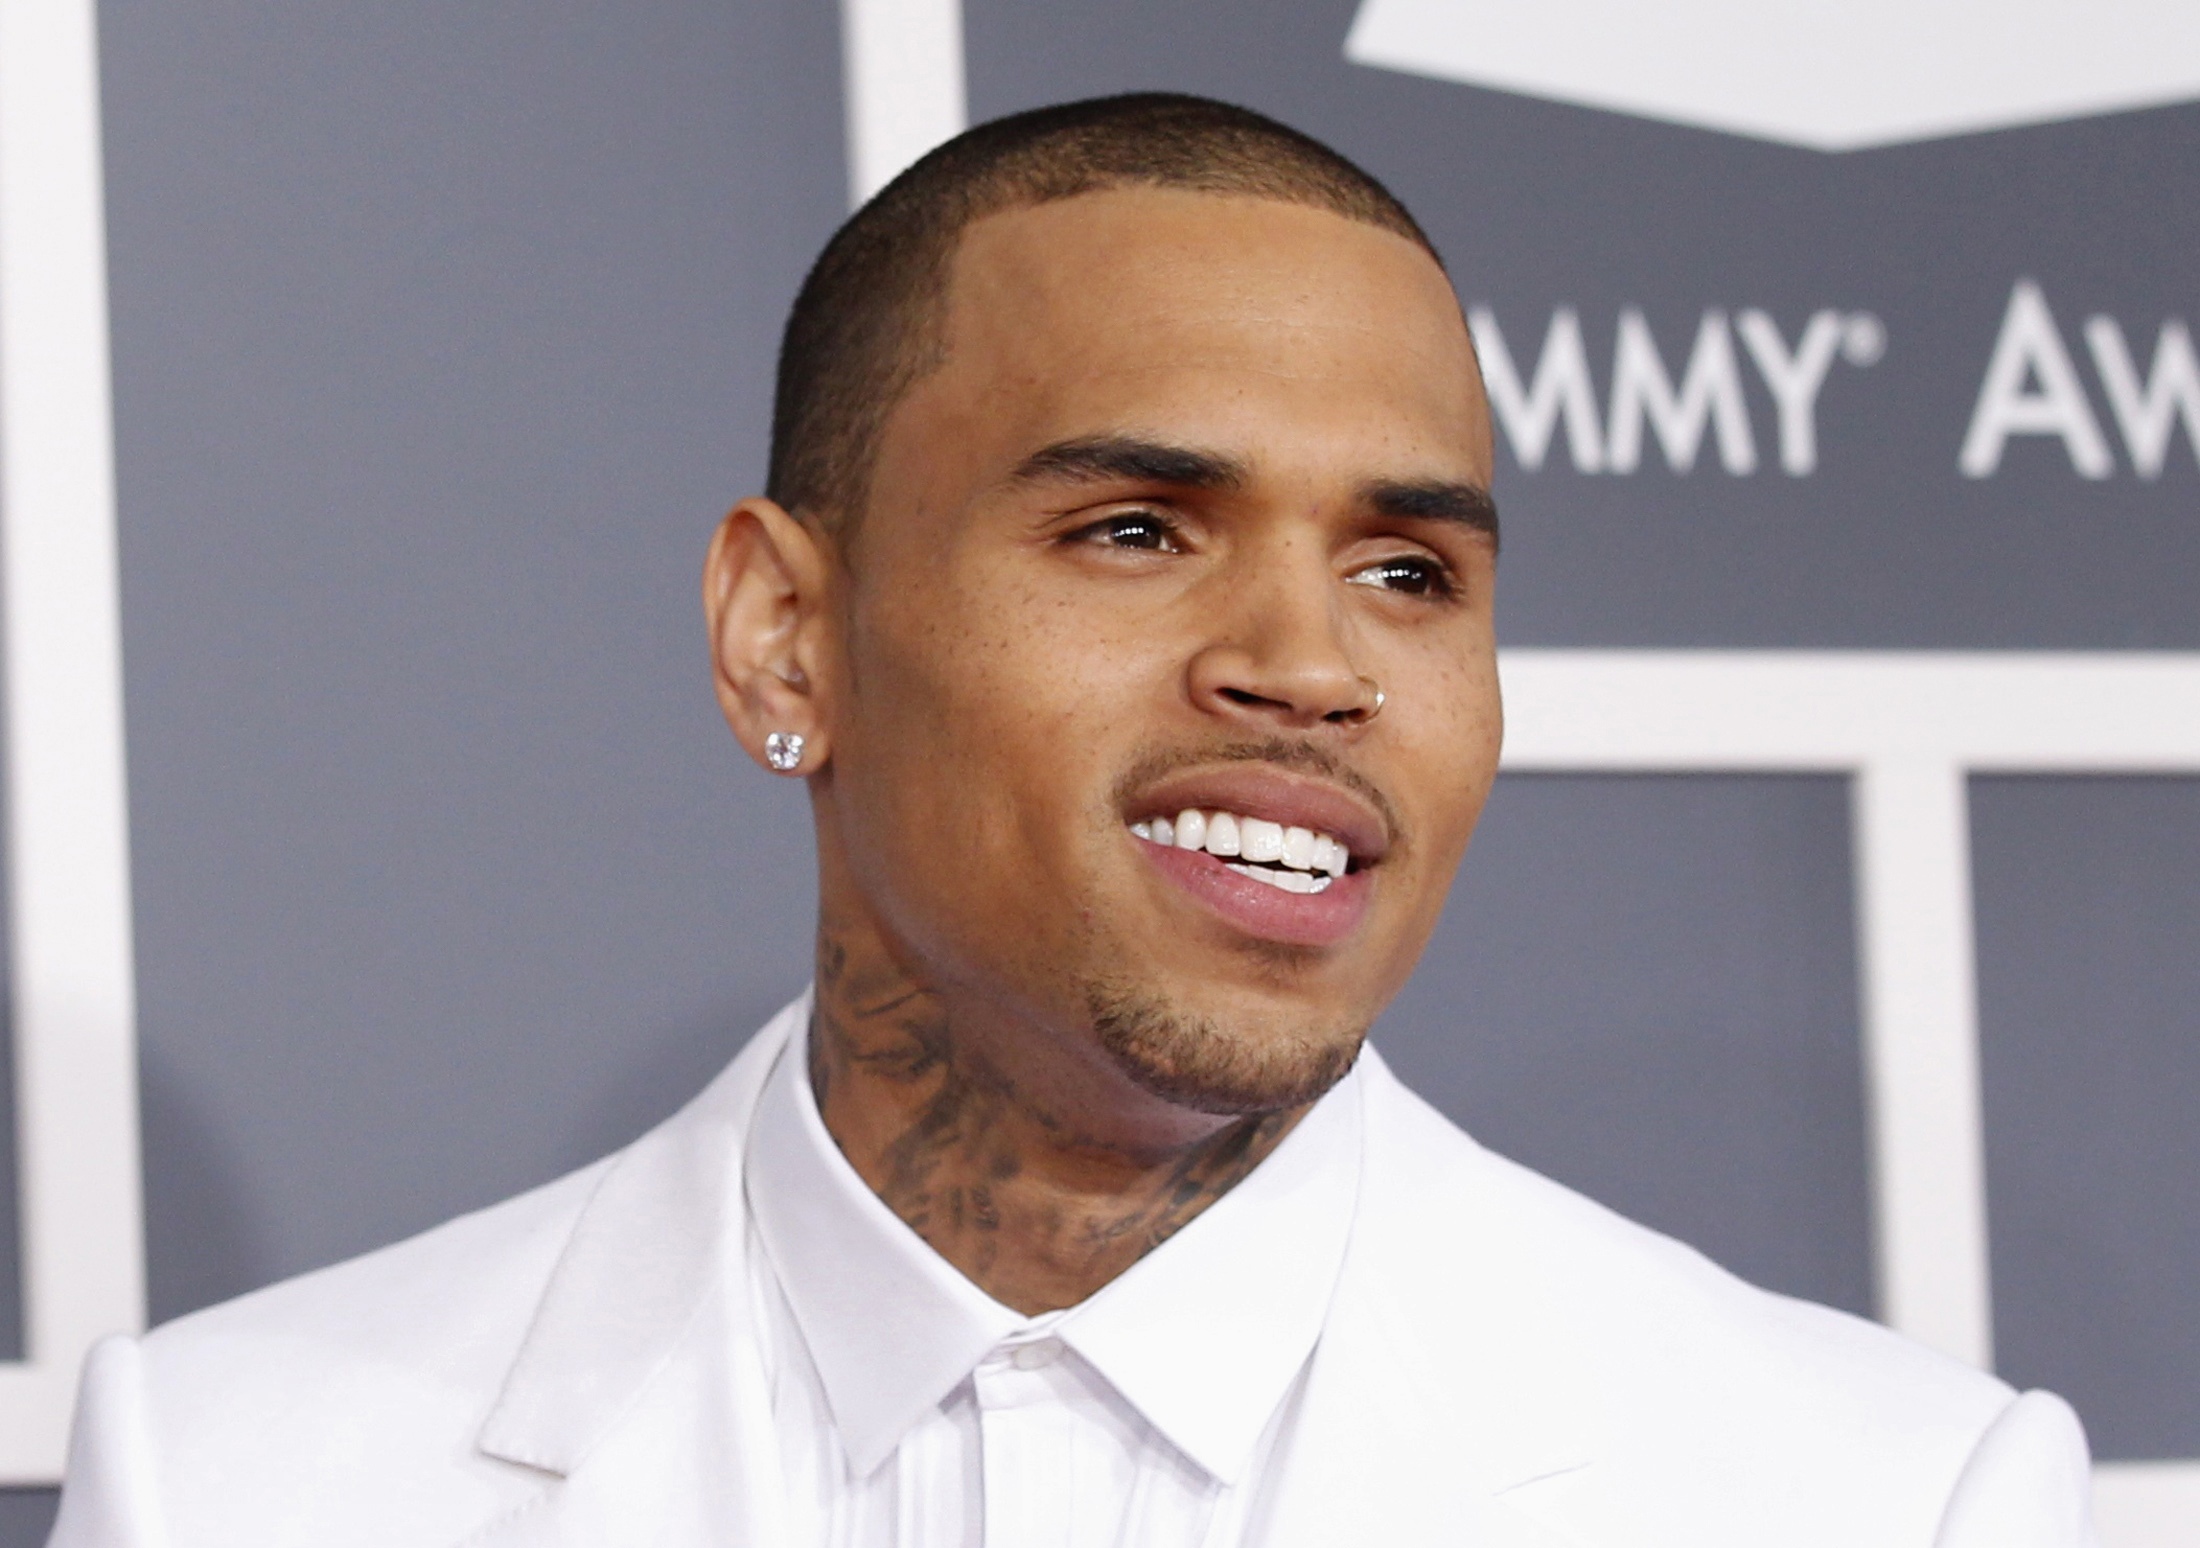 Singer Chris Brown arrives at the 55th annual Grammy Awards in Los Angeles, California in this February 10, 2013 file photo.  Brown, on probation for punching and beating his former girlfriend, was charged on June 25, 2013 with a hit-and-run and driving without a valid license in connection with a May 21 traffic accident in Los Angeles.  REUTERS/Mario Anzuoni/Files (UNITED STATES - Tags: ENTERTAINMENT CRIME LAW)